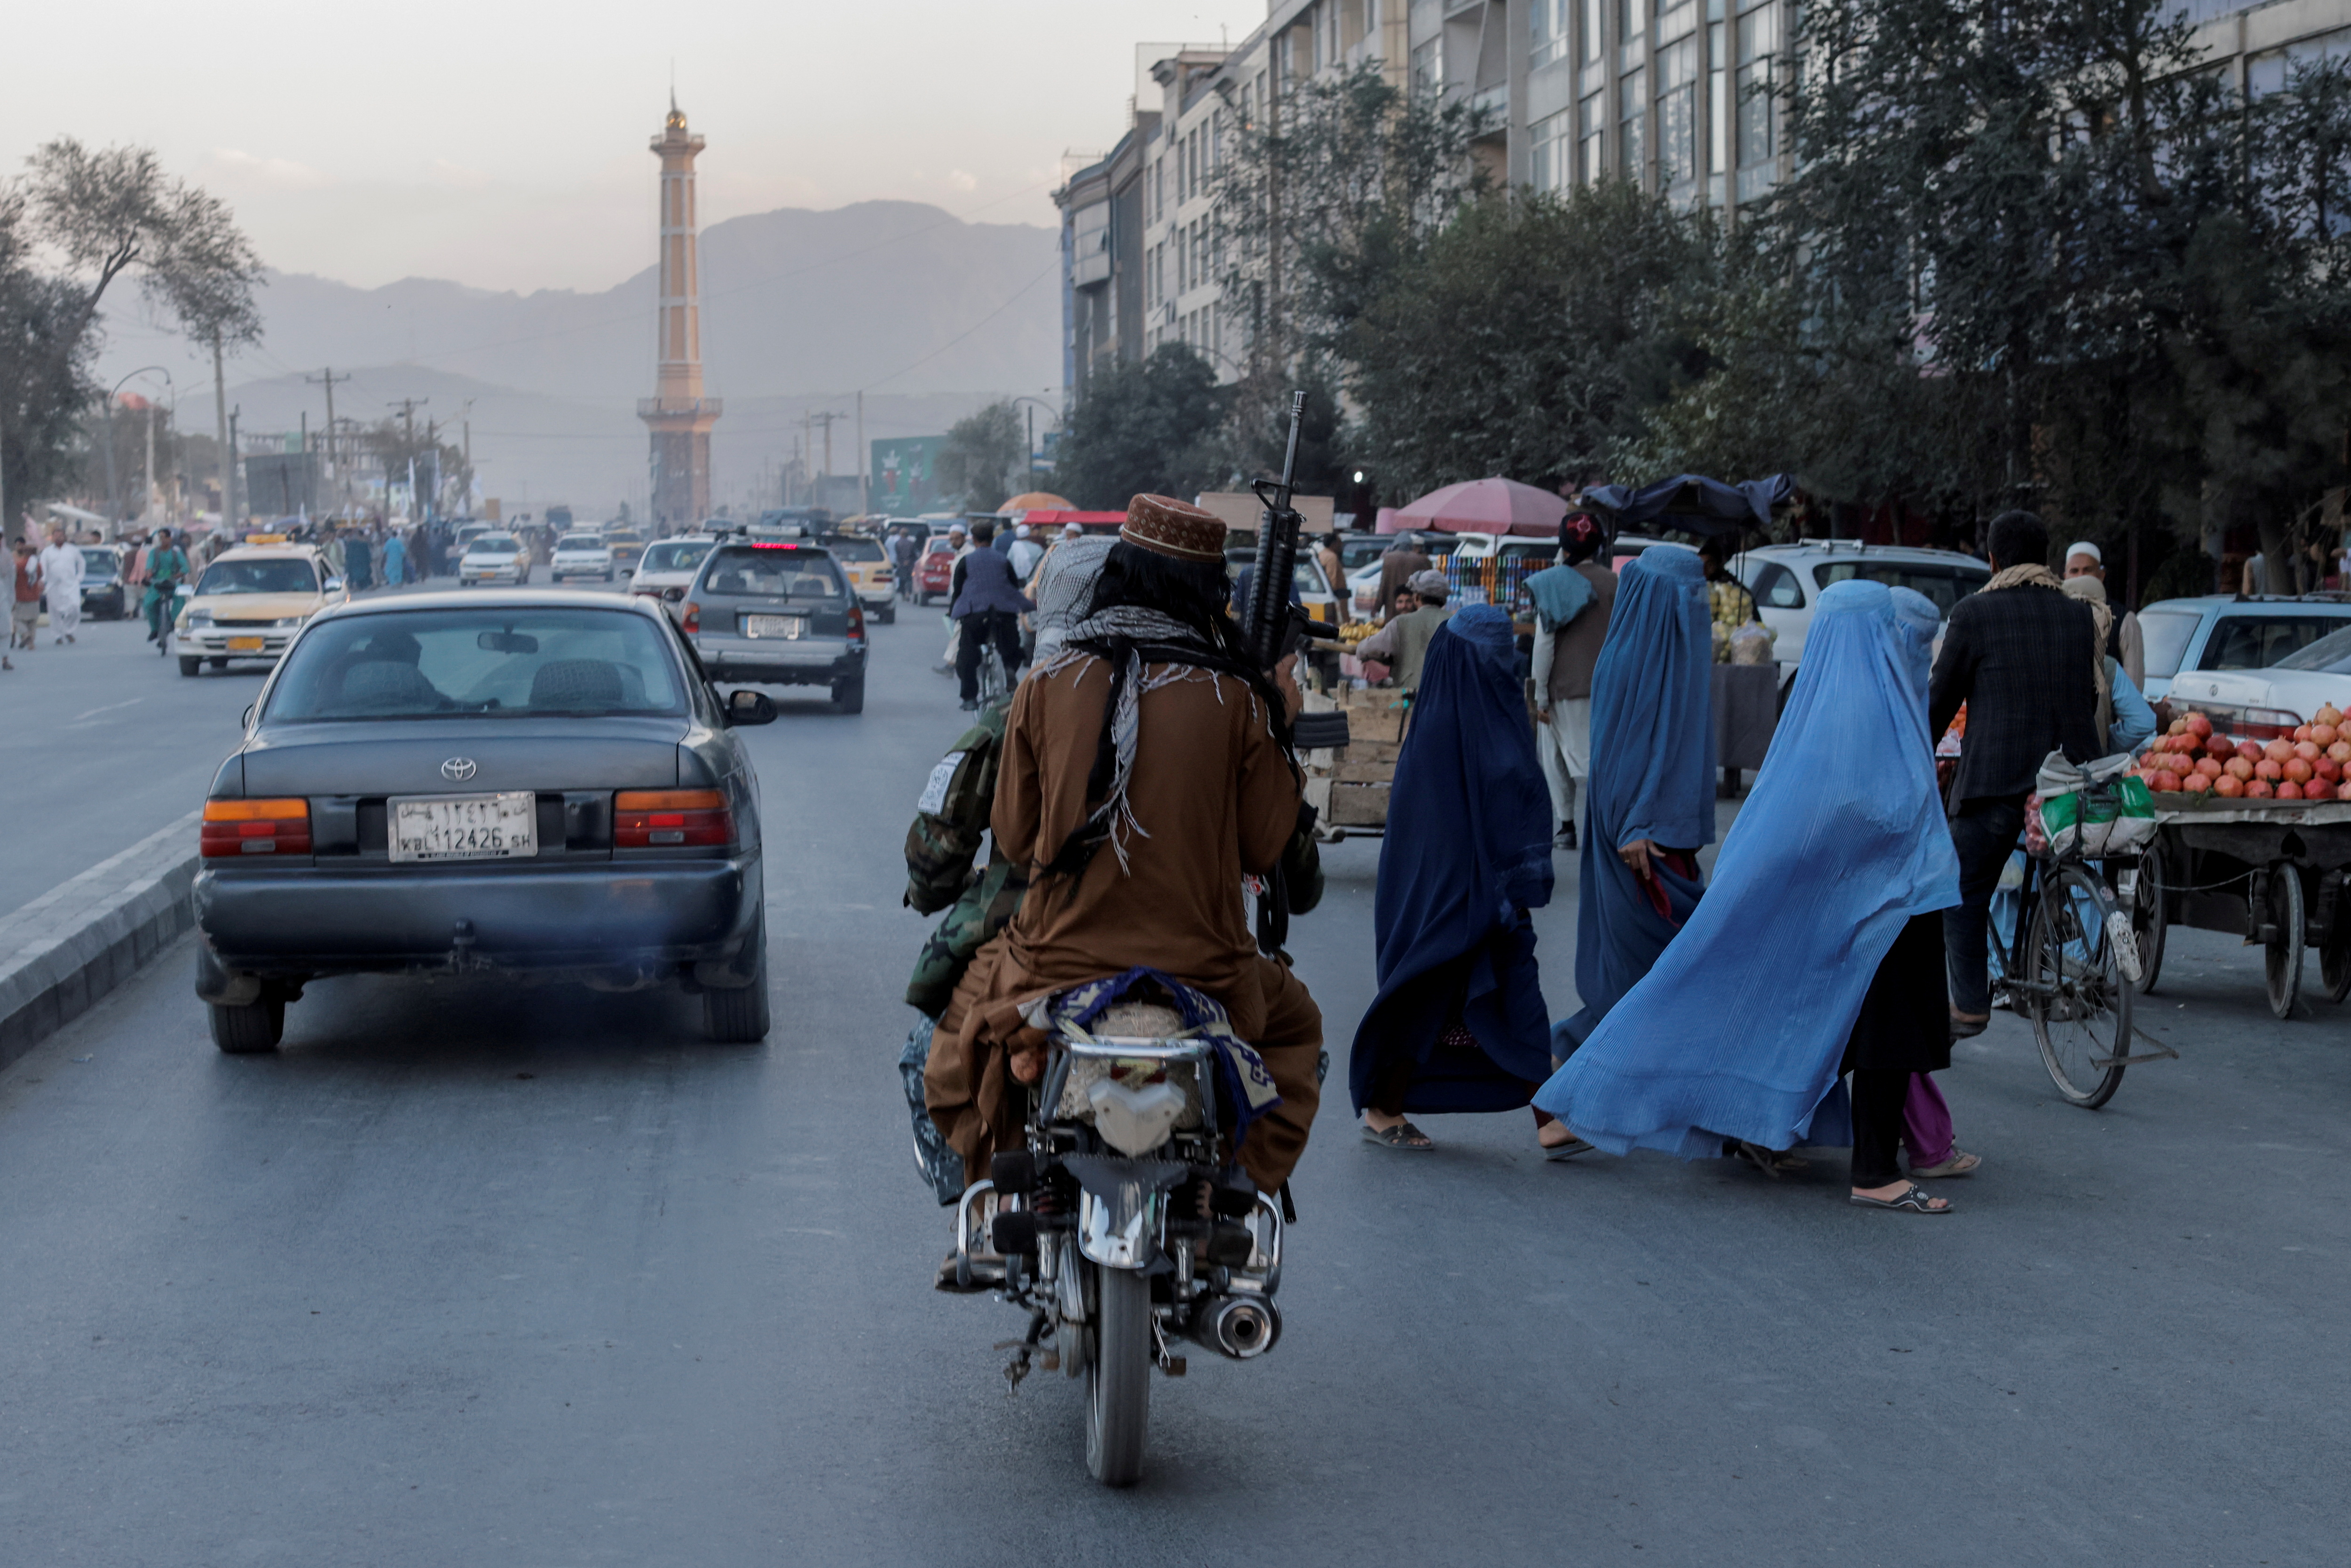 A group of women wearing burqas crosses the street as members of the Taliban drive past in Kabul, Afghanistan October 9, 2021. REUTERS/Jorge Silva/File Photo